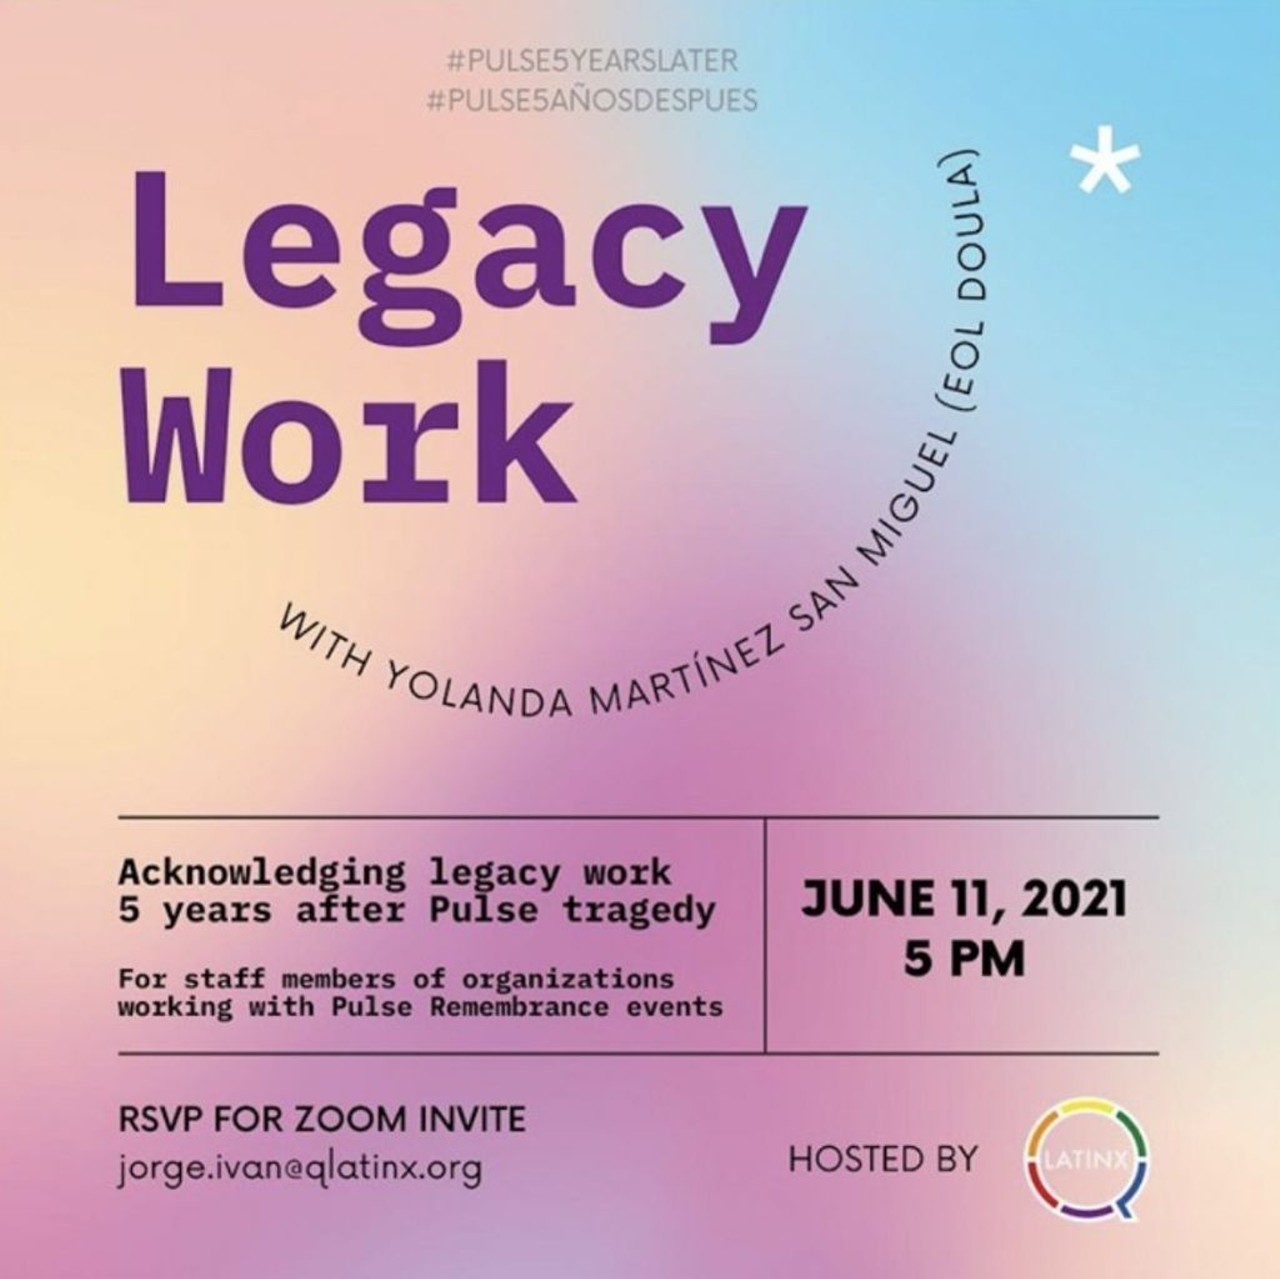 Legacy Work: 5 Year Journey After Pulse Tragedy 
June 11 5:00 p.m. to 7:00 p.m. Virtual Event 
An event intended for staff members of organizations that have supported survivors and community members affected by the Pulse tragedy. This night is to acknowledge the initiatives and work that help the Orlando community.
Photo via QLatinx